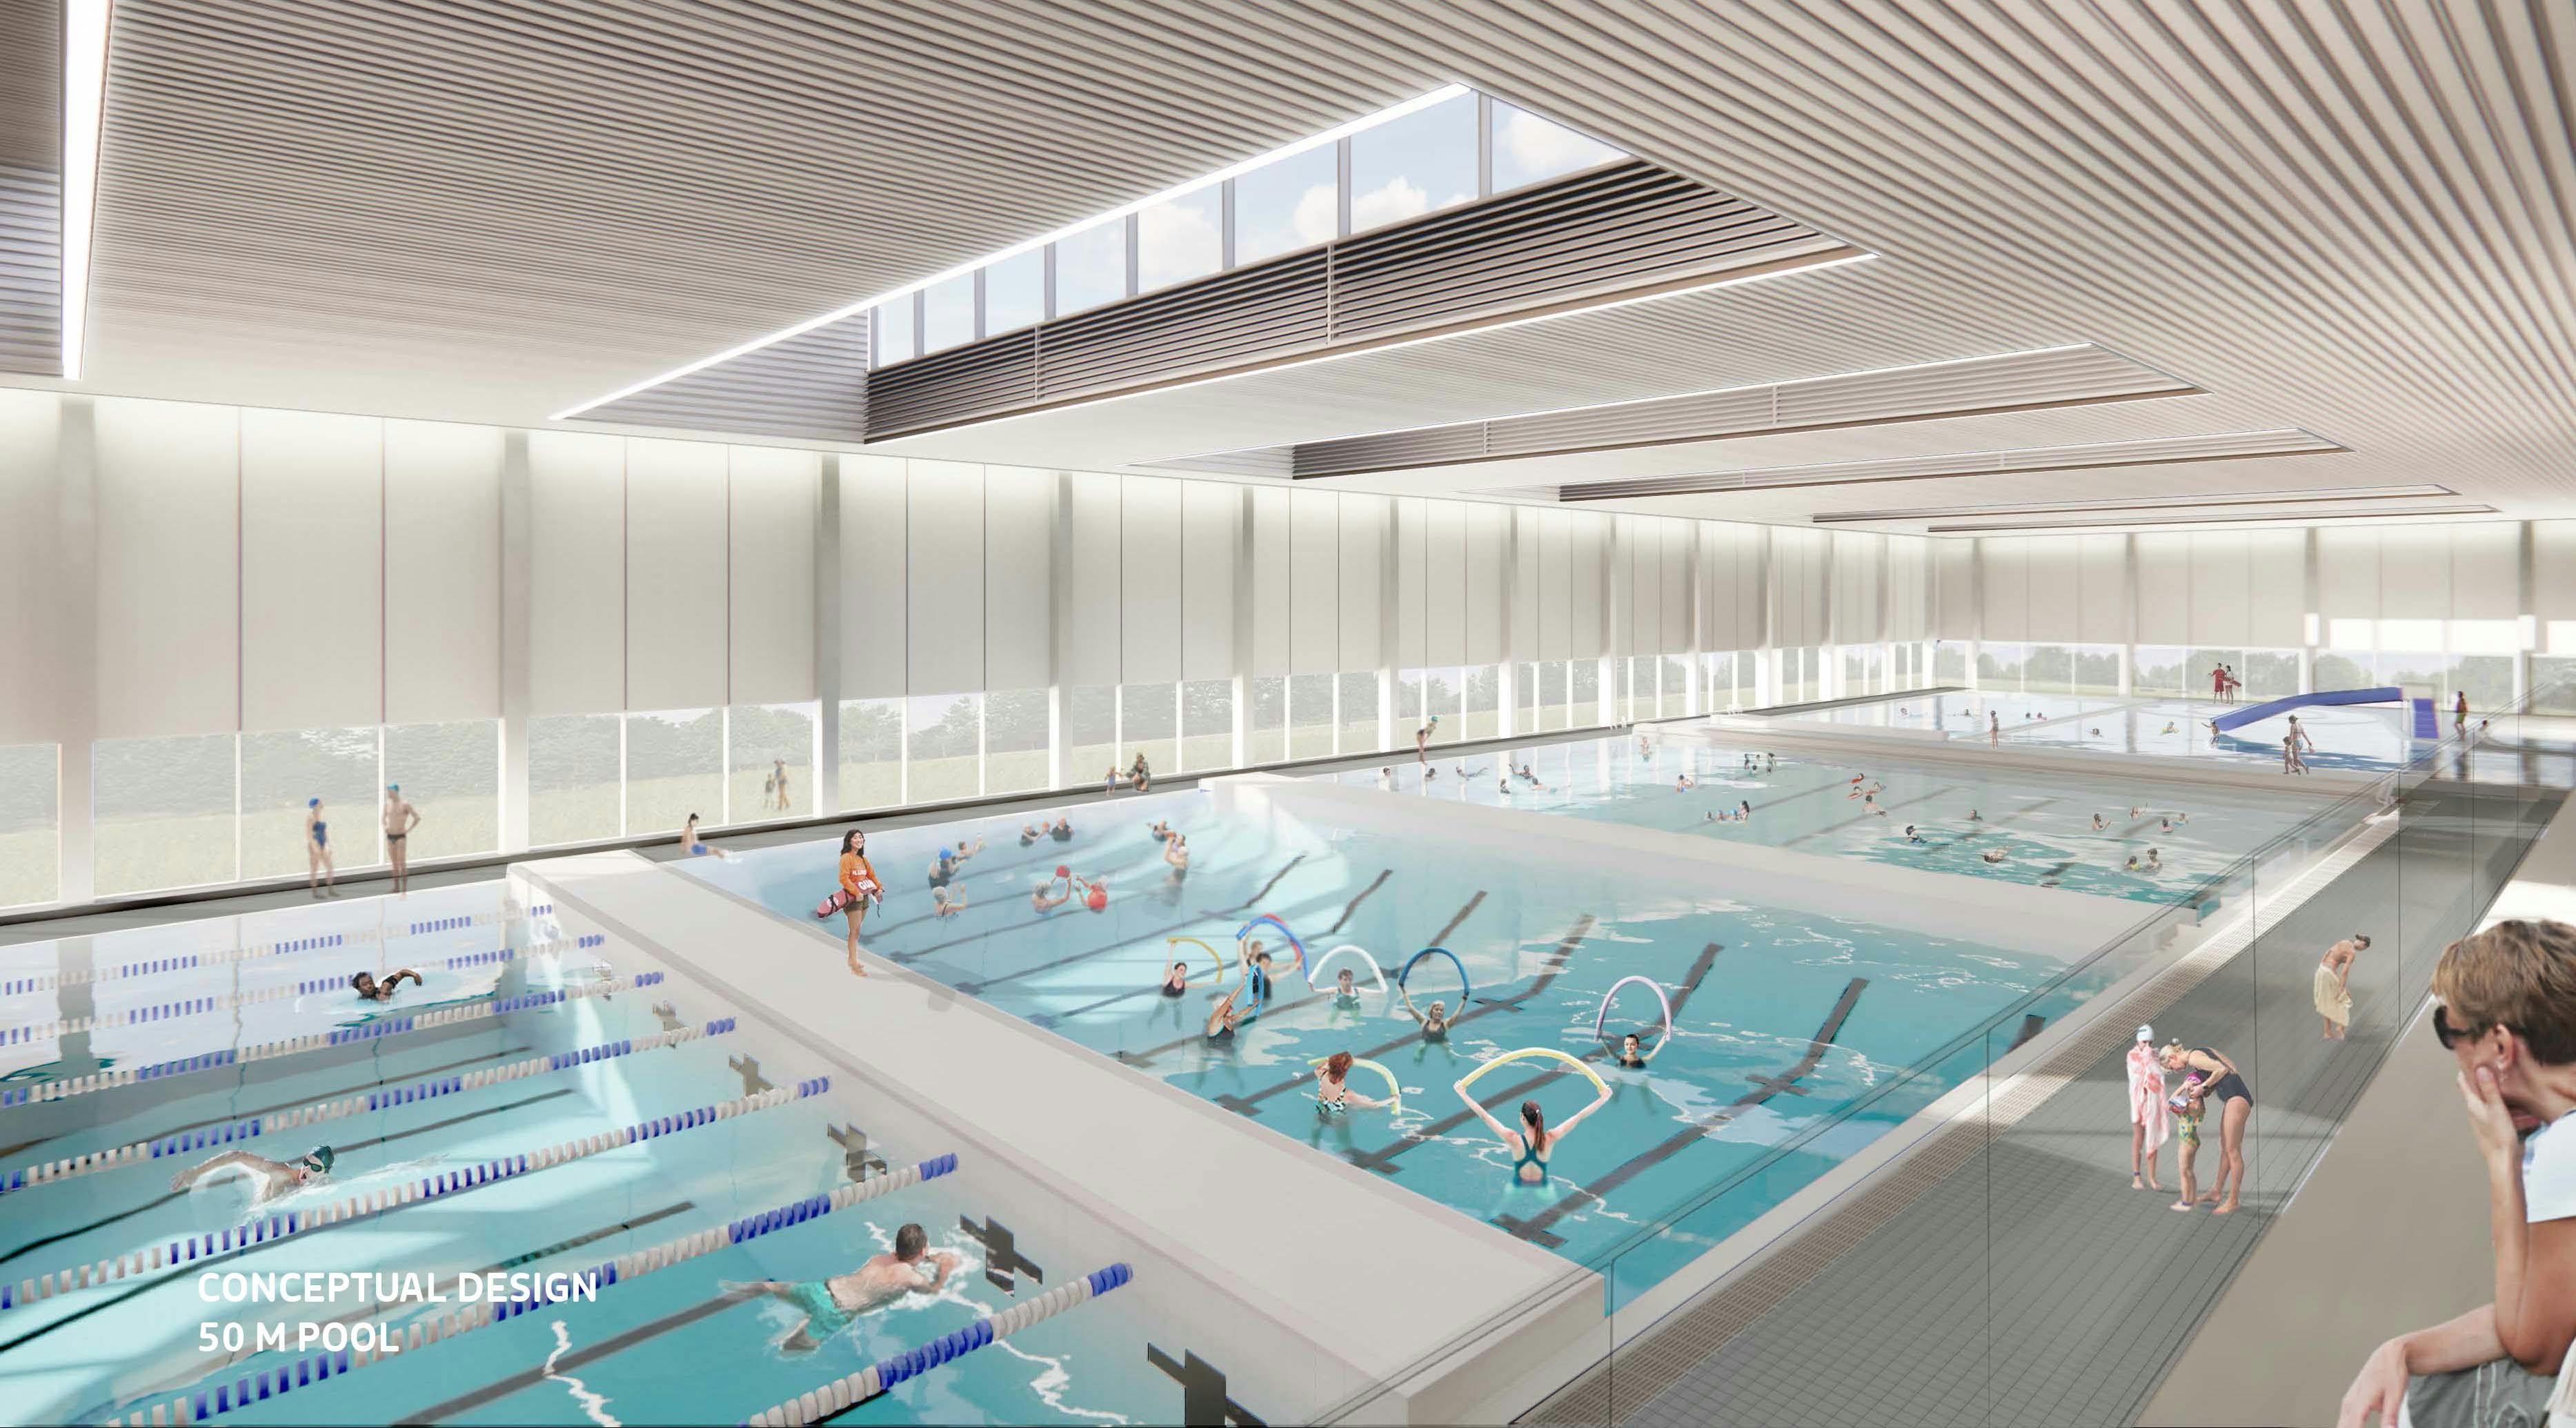 50m pool with two movable bulk heads conceptual design